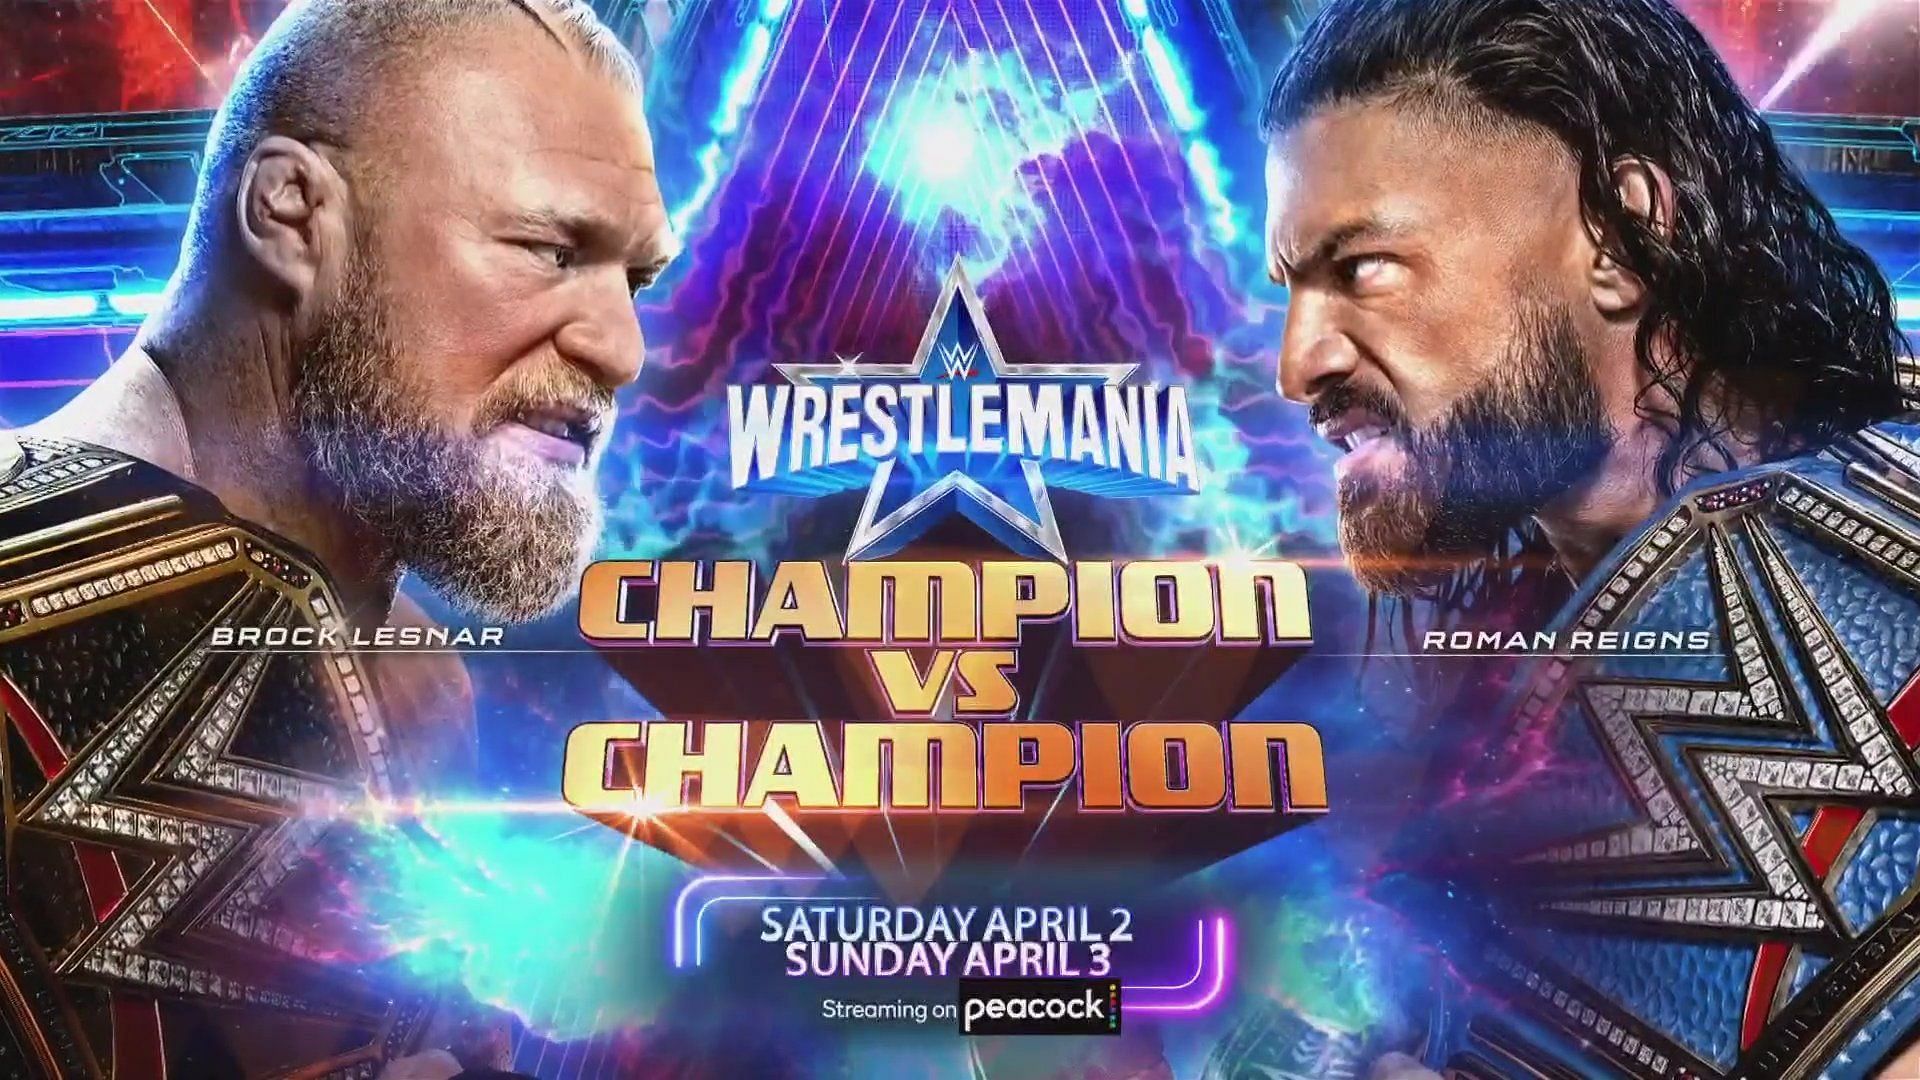 Who will walk out of WrestleMania as Champion?